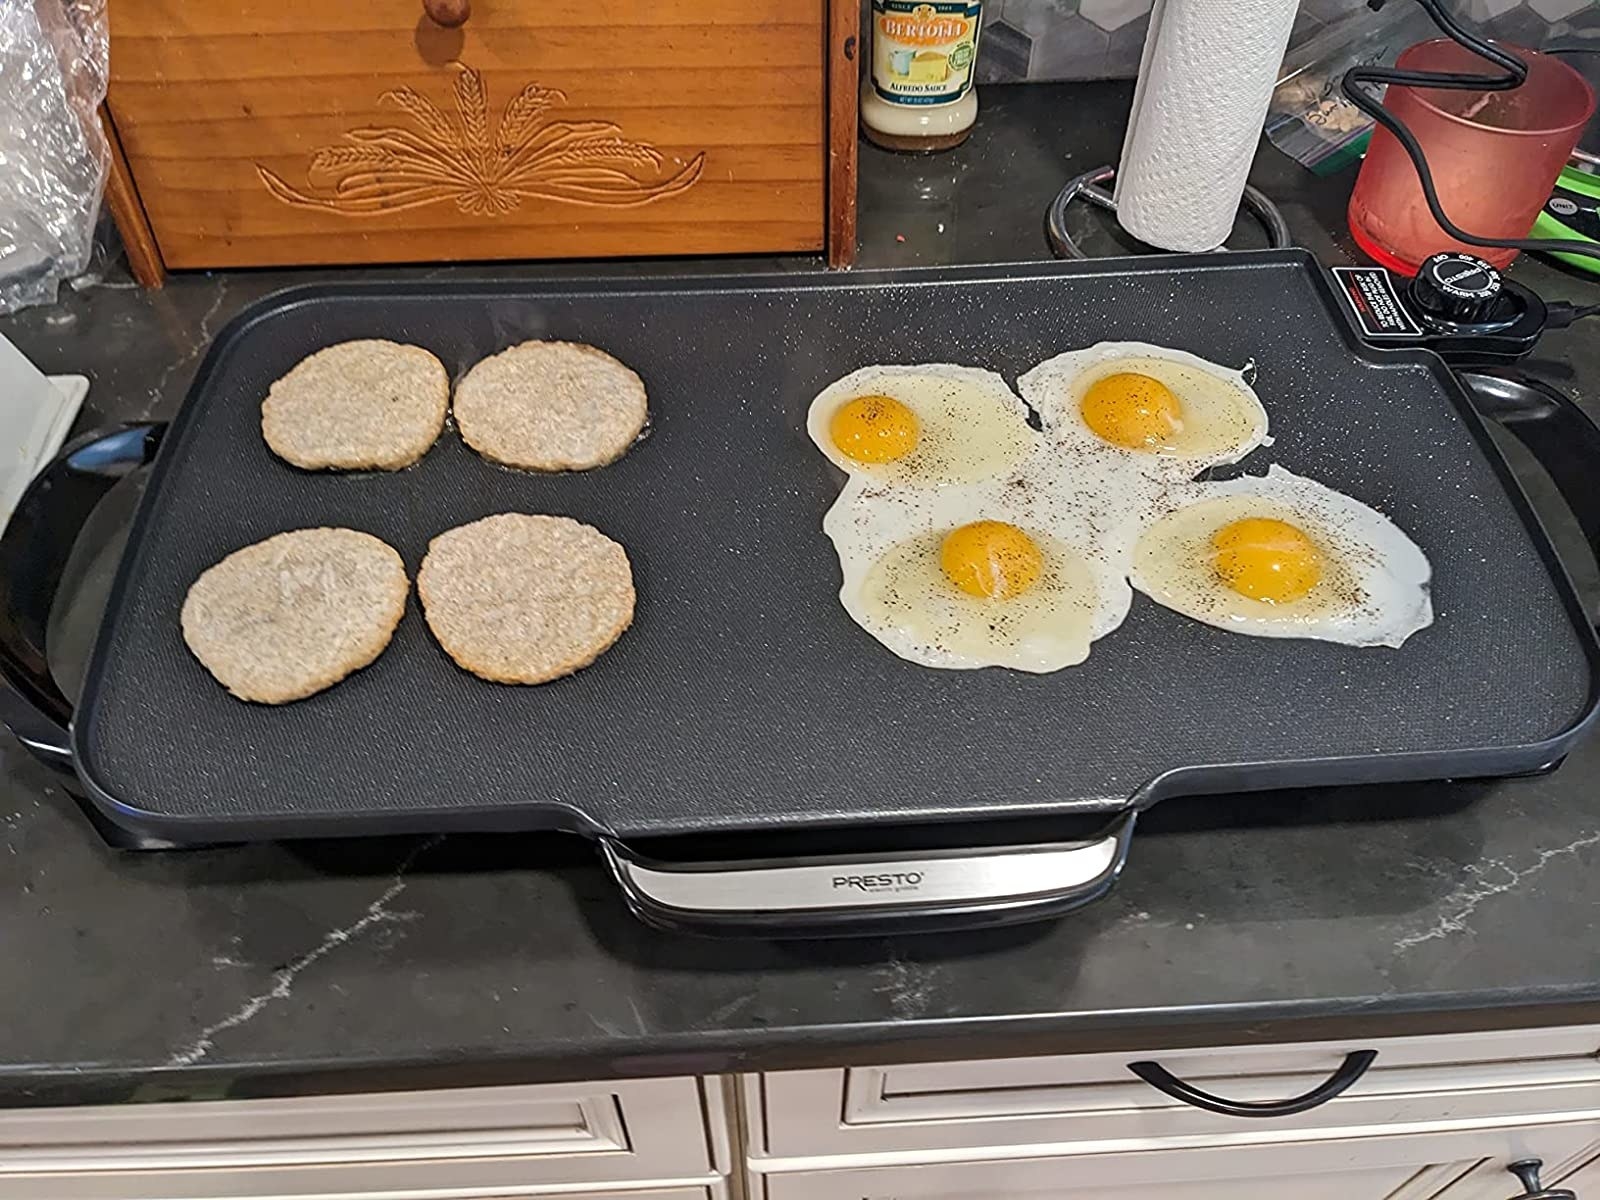 Reviewer cooking up sausage patties and fried eggs on griddle